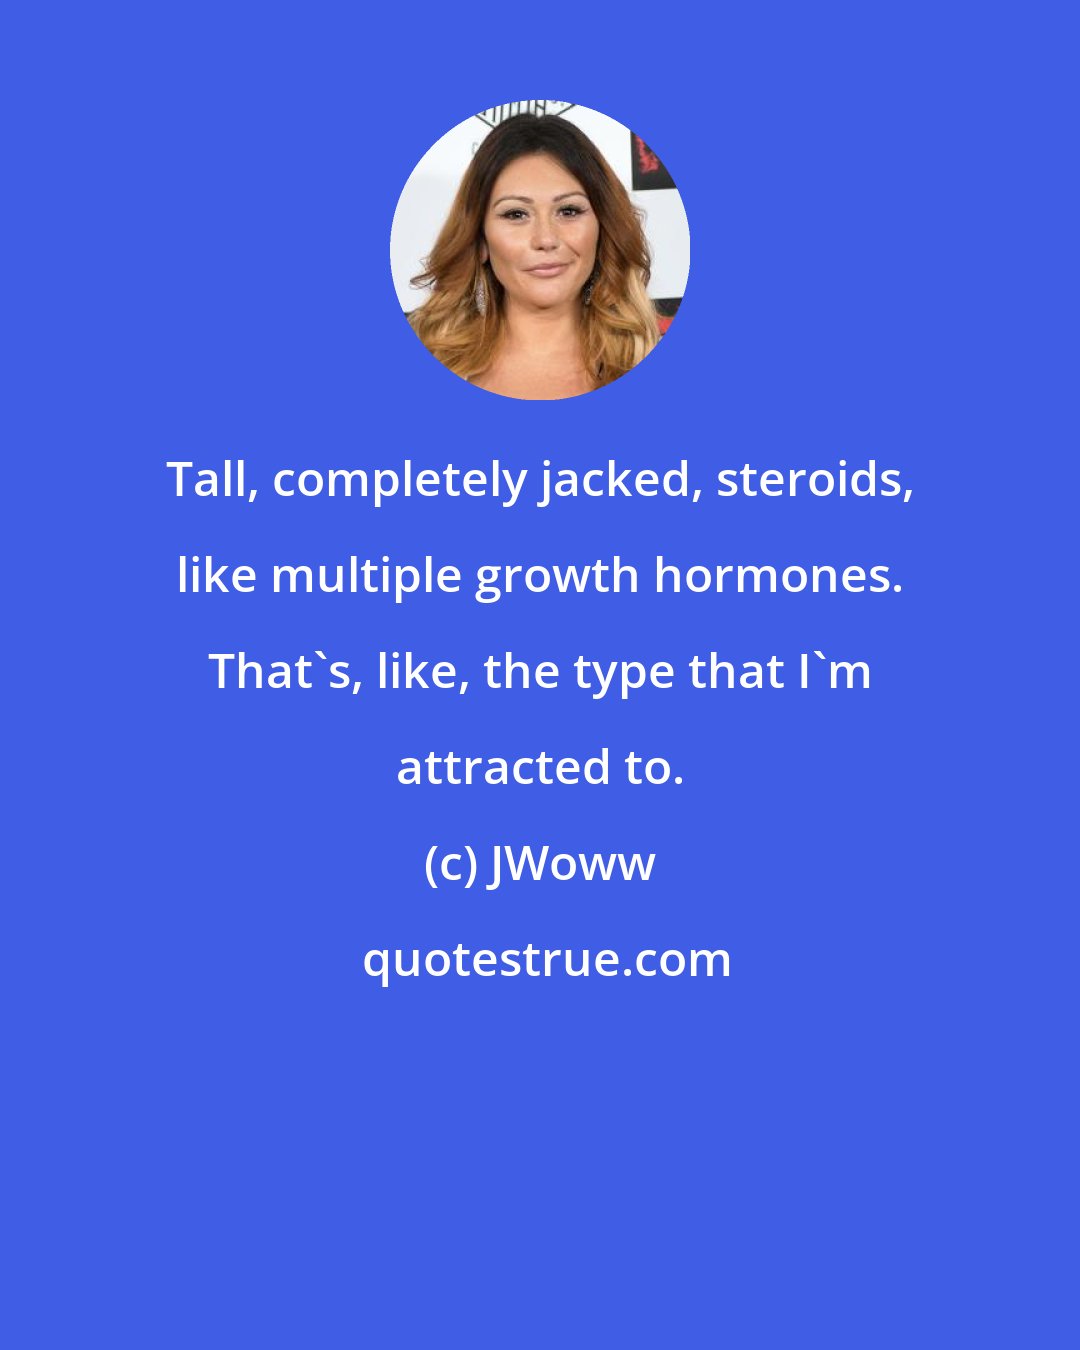 JWoww: Tall, completely jacked, steroids, like multiple growth hormones. That's, like, the type that I'm attracted to.